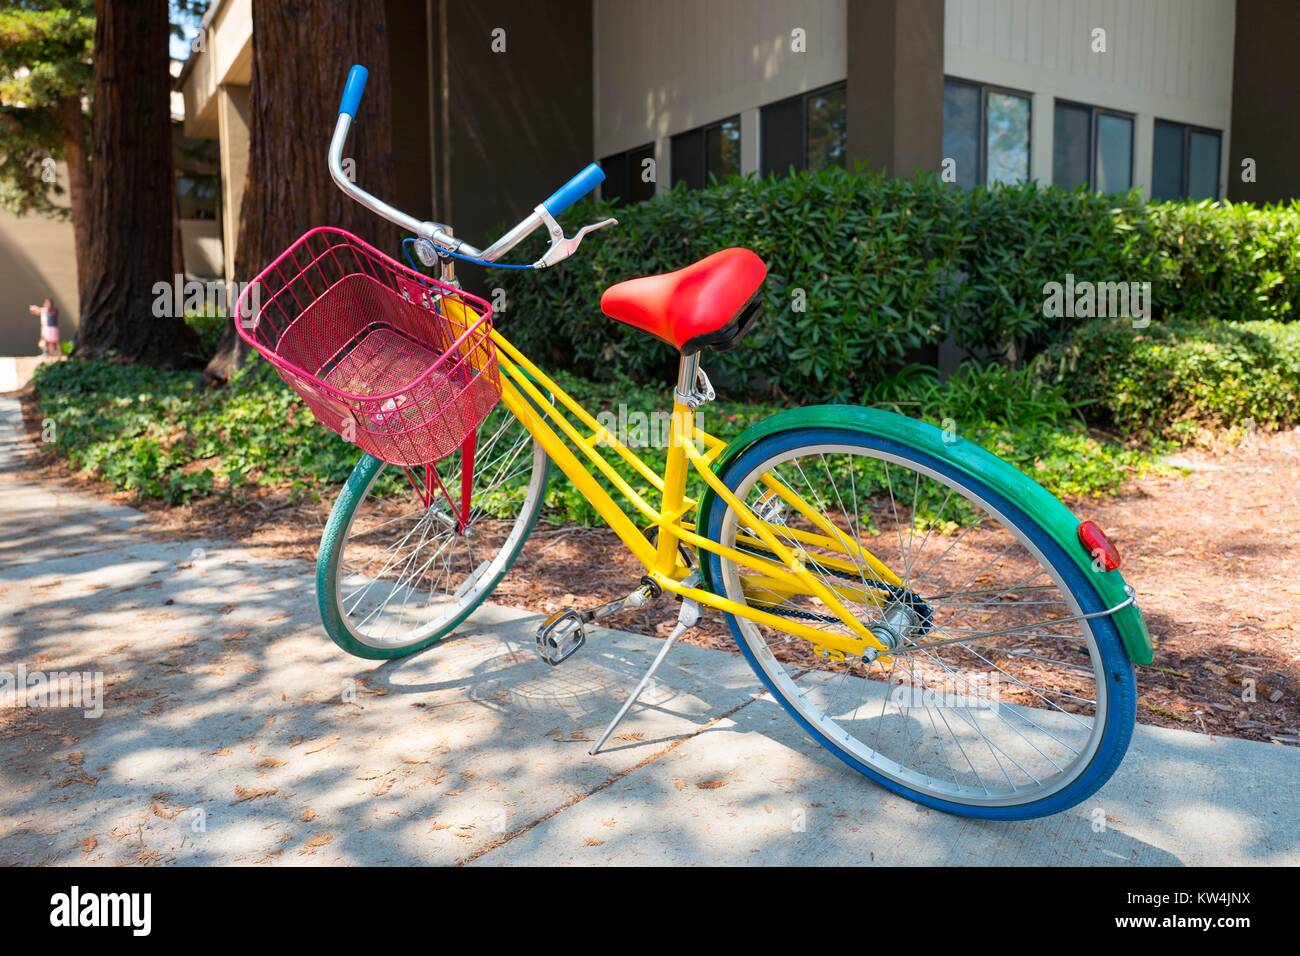 Colorful Google Bike parked in front of a building at the Googleplex, headquarters of the search engine company Google in the Silicon Valley town of Mountain View, California, August 24, 2016. Employees are encouraged to ride the free bikes around Google's campus, and to leave them in front of Google buildings once they arrive at their destination, Mountain View, California. Stock Photo